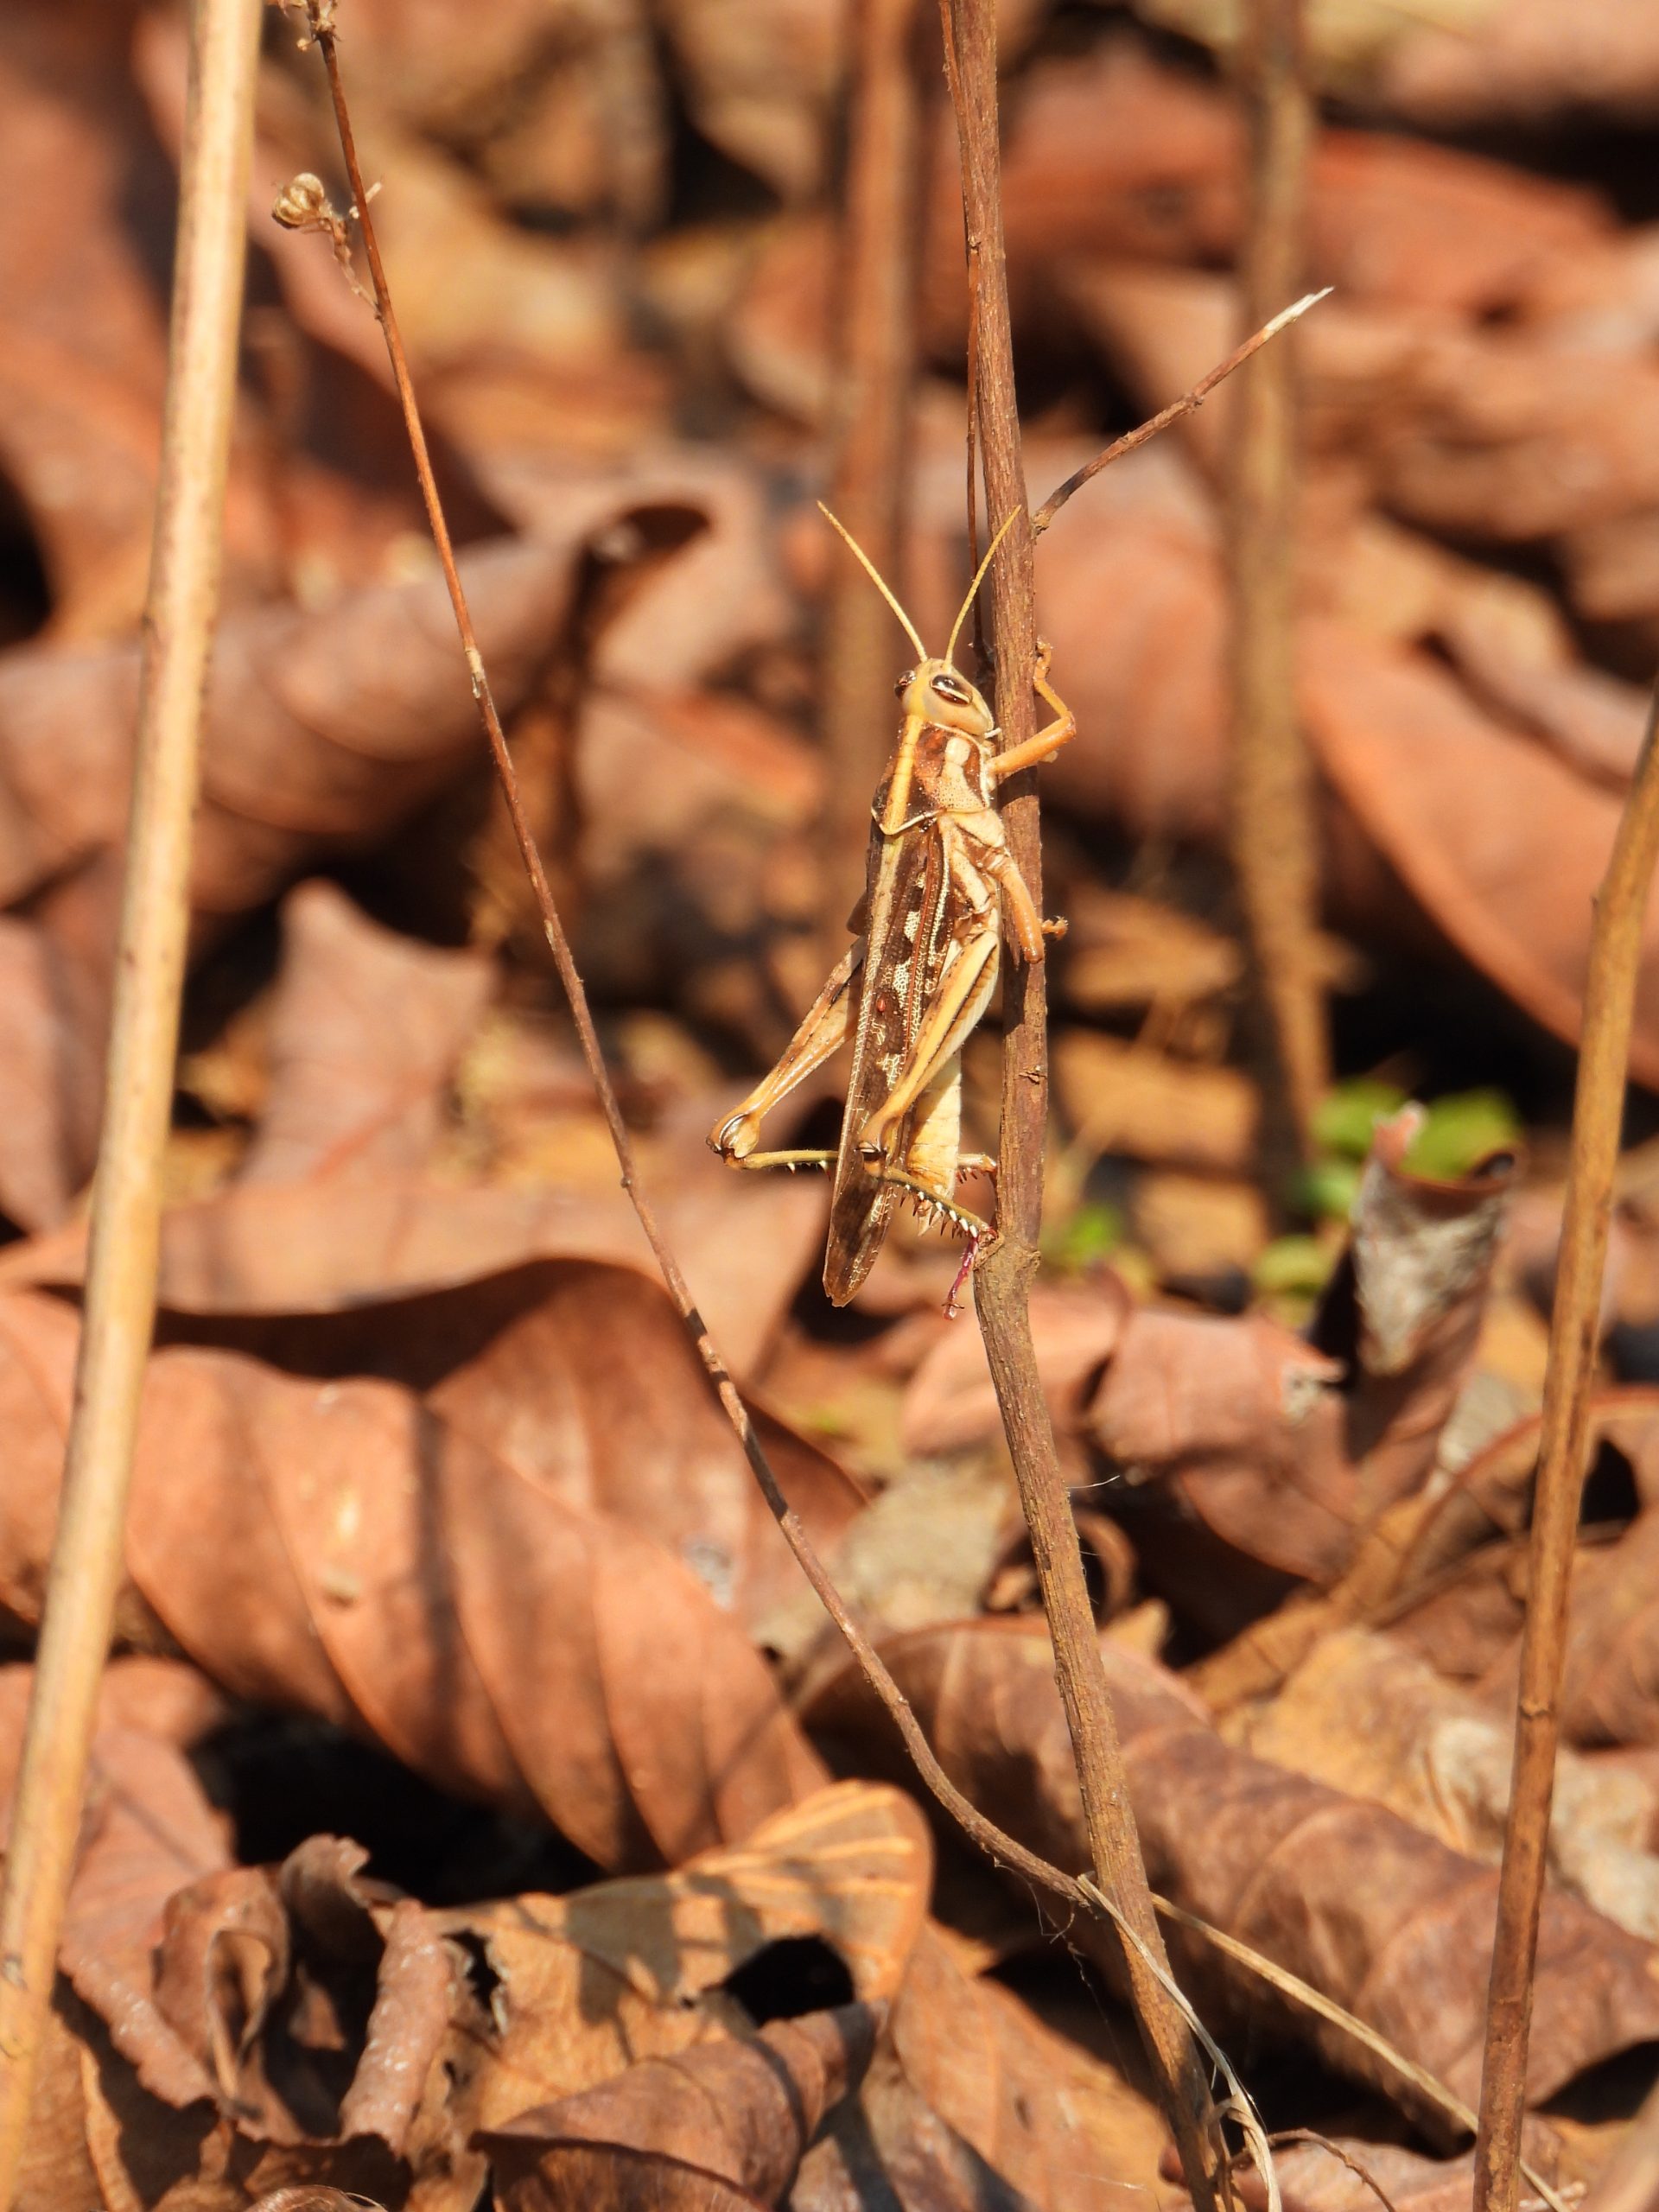 A grasshopper on a dry branches